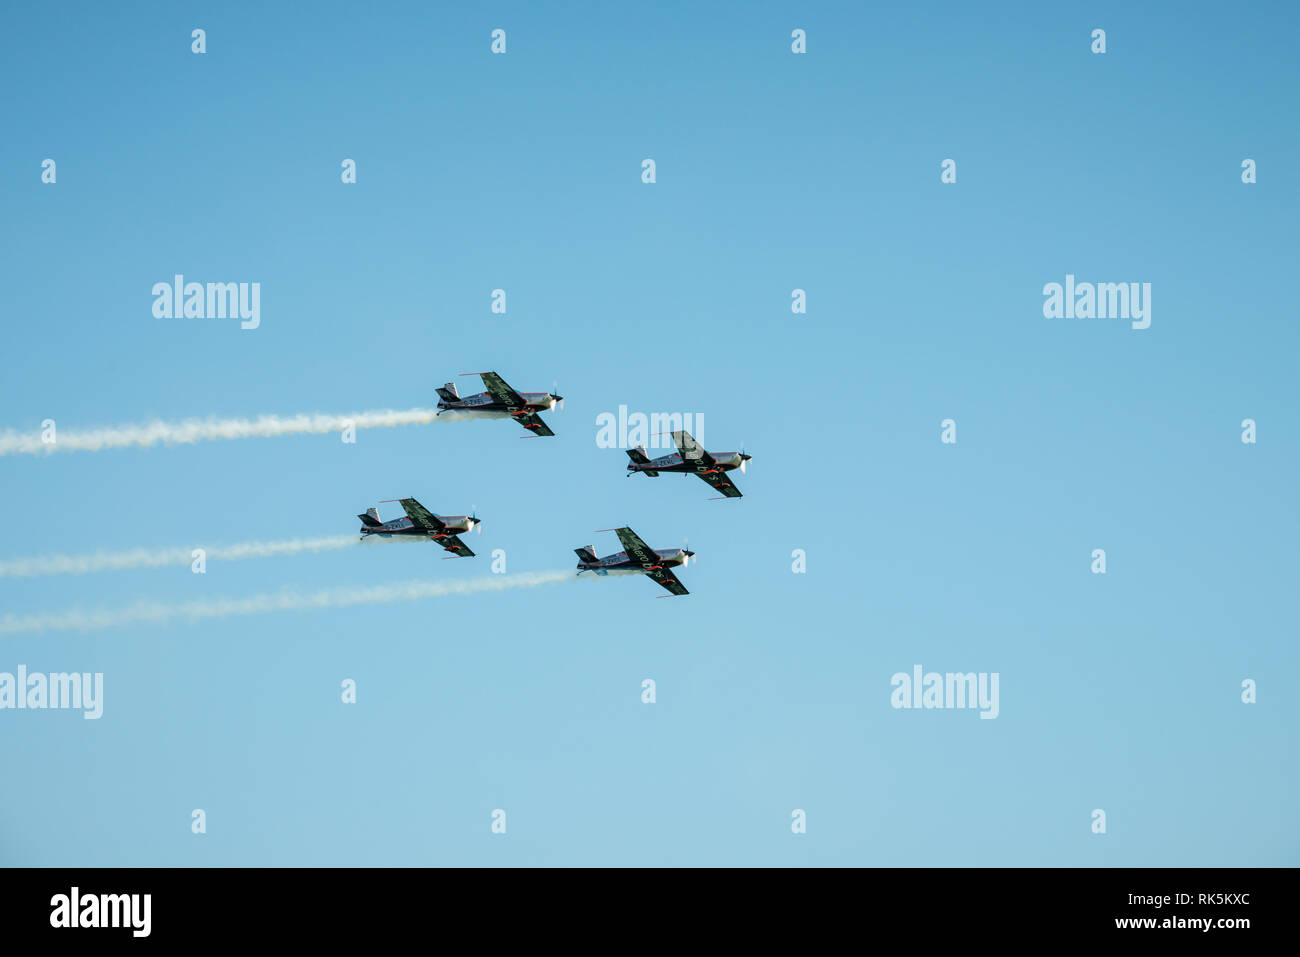 Four aircraft fly close together as they perform a stunt during the Eastbourne Airshow in Sussex, England. Stock Photo